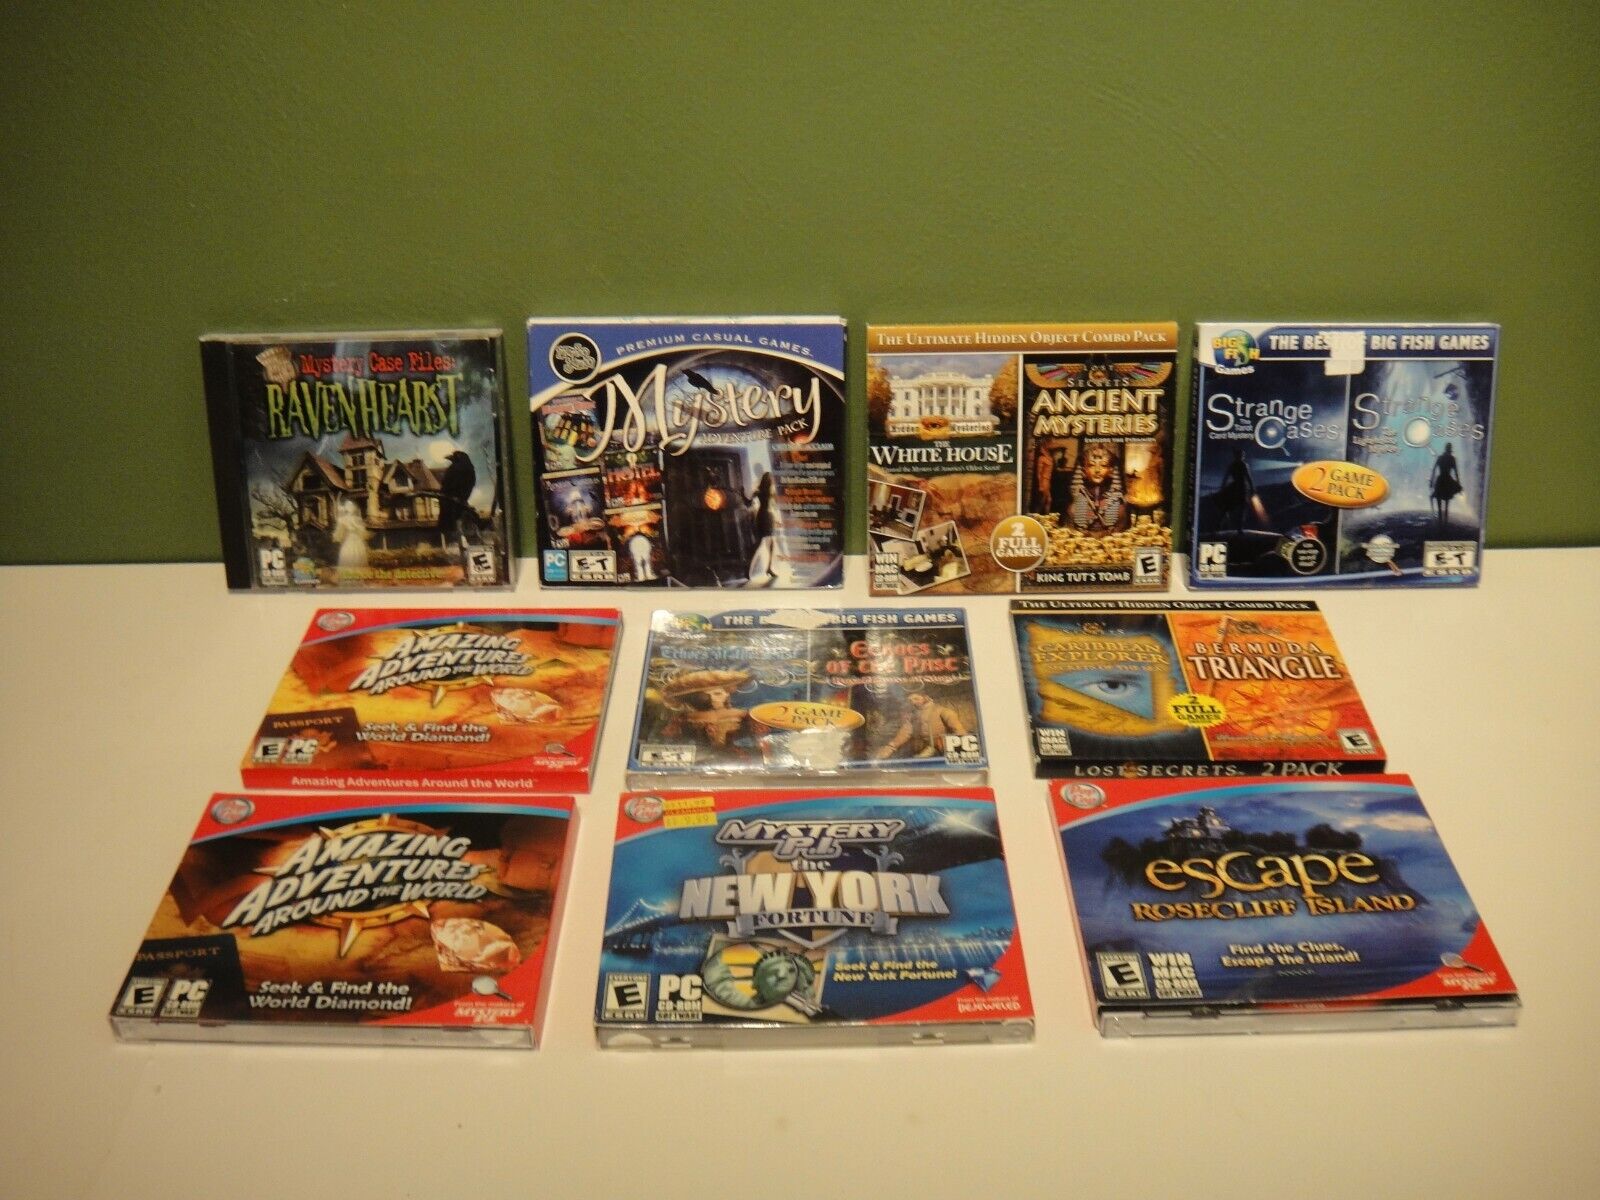 Lot of 10 PC CD-Rom Games Amazing Adventures, Mystery P.I., Hidden Object, Story